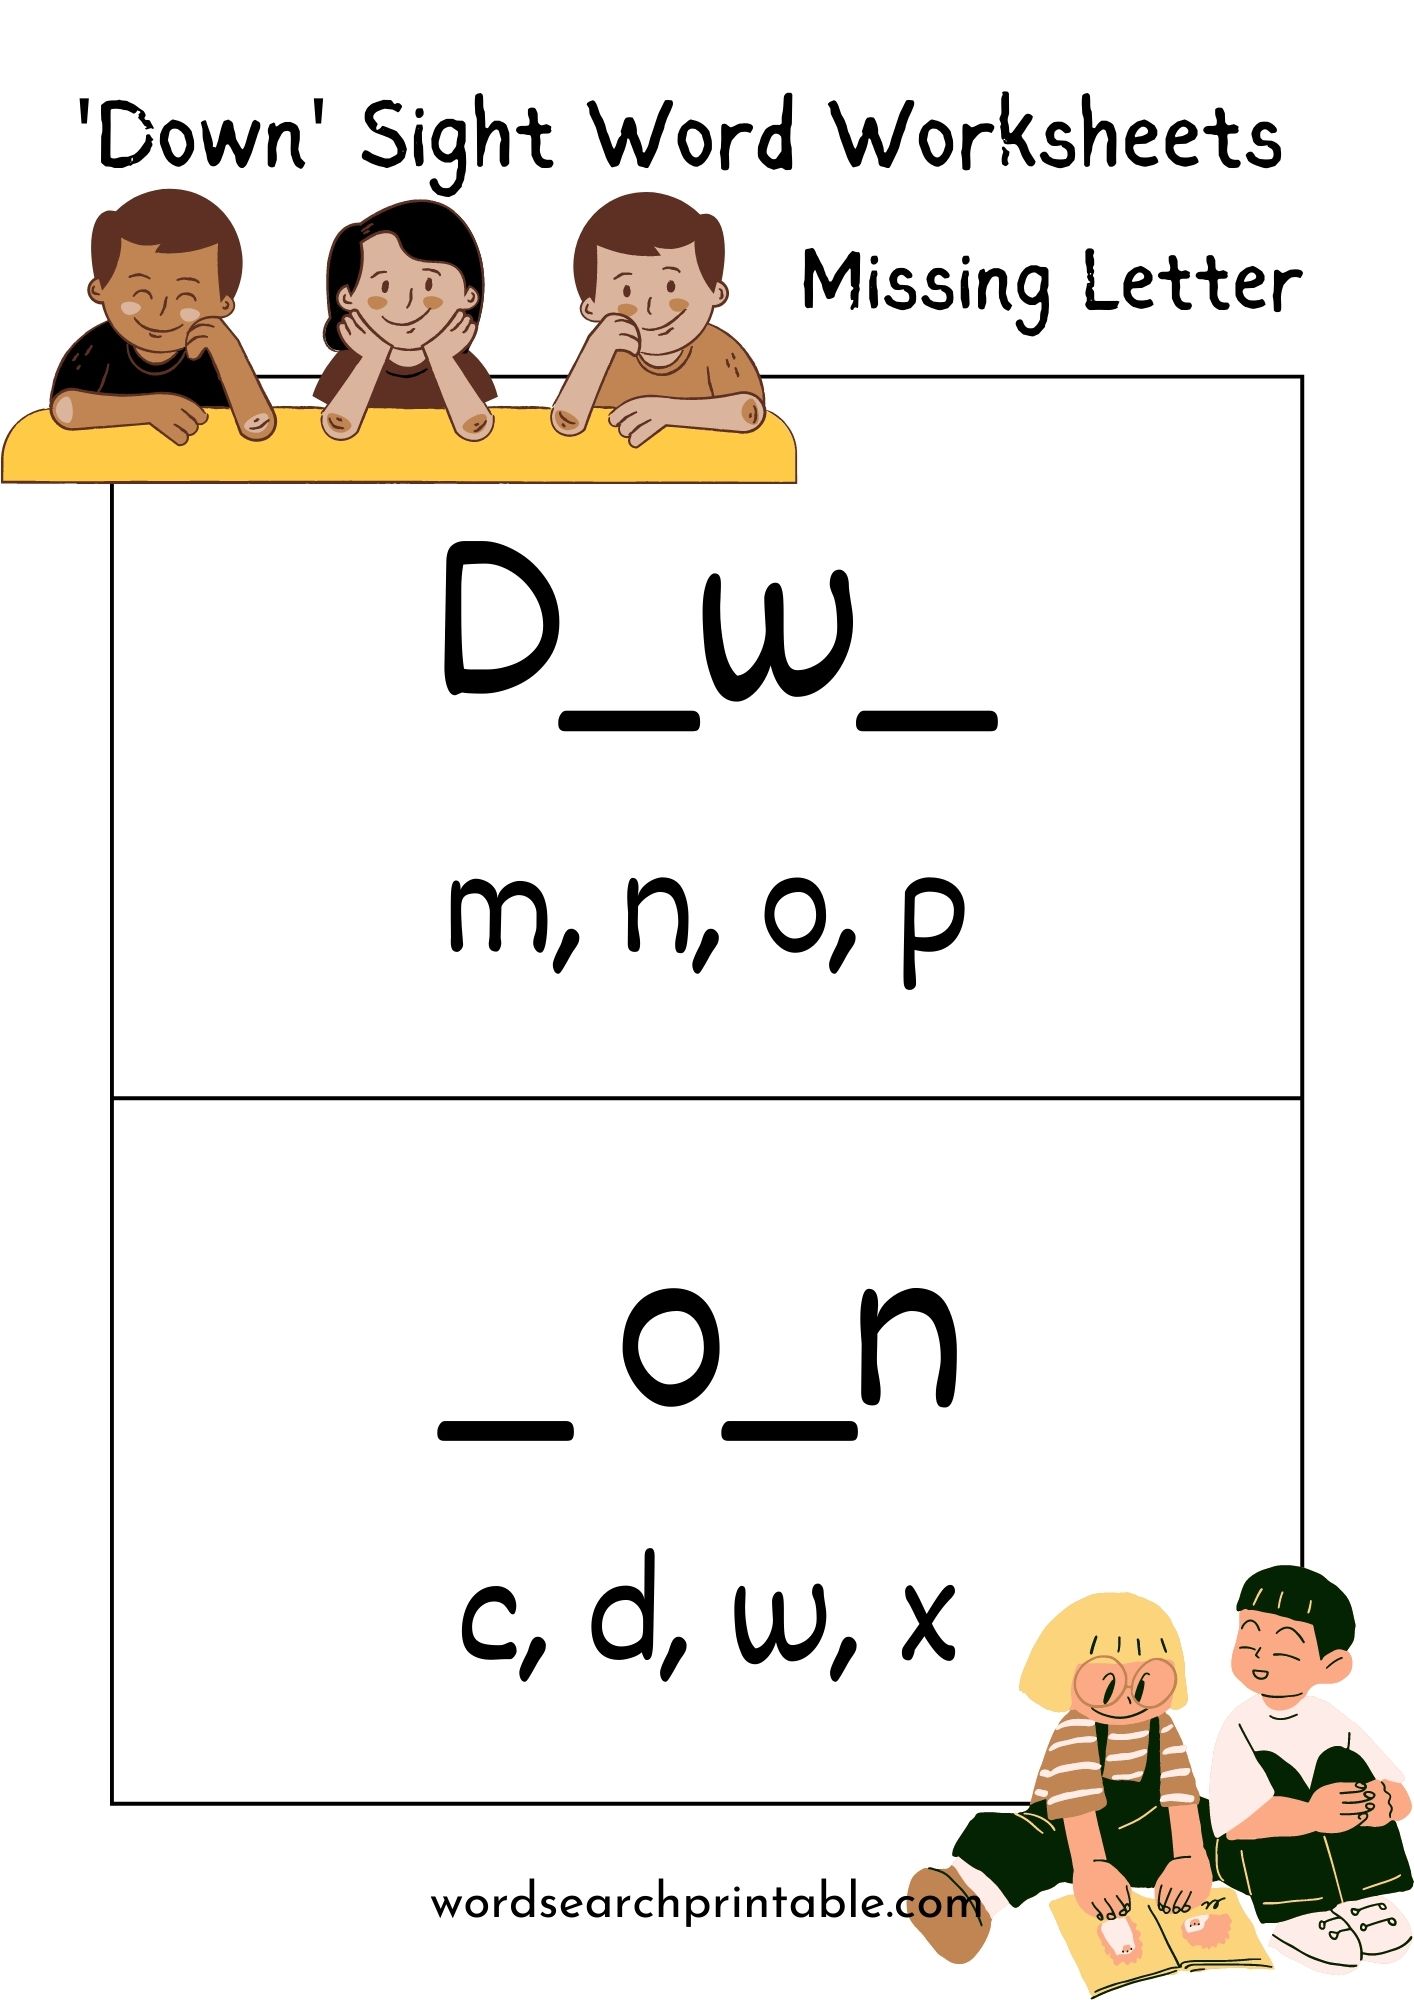 Find the missing letter in word 'Down'